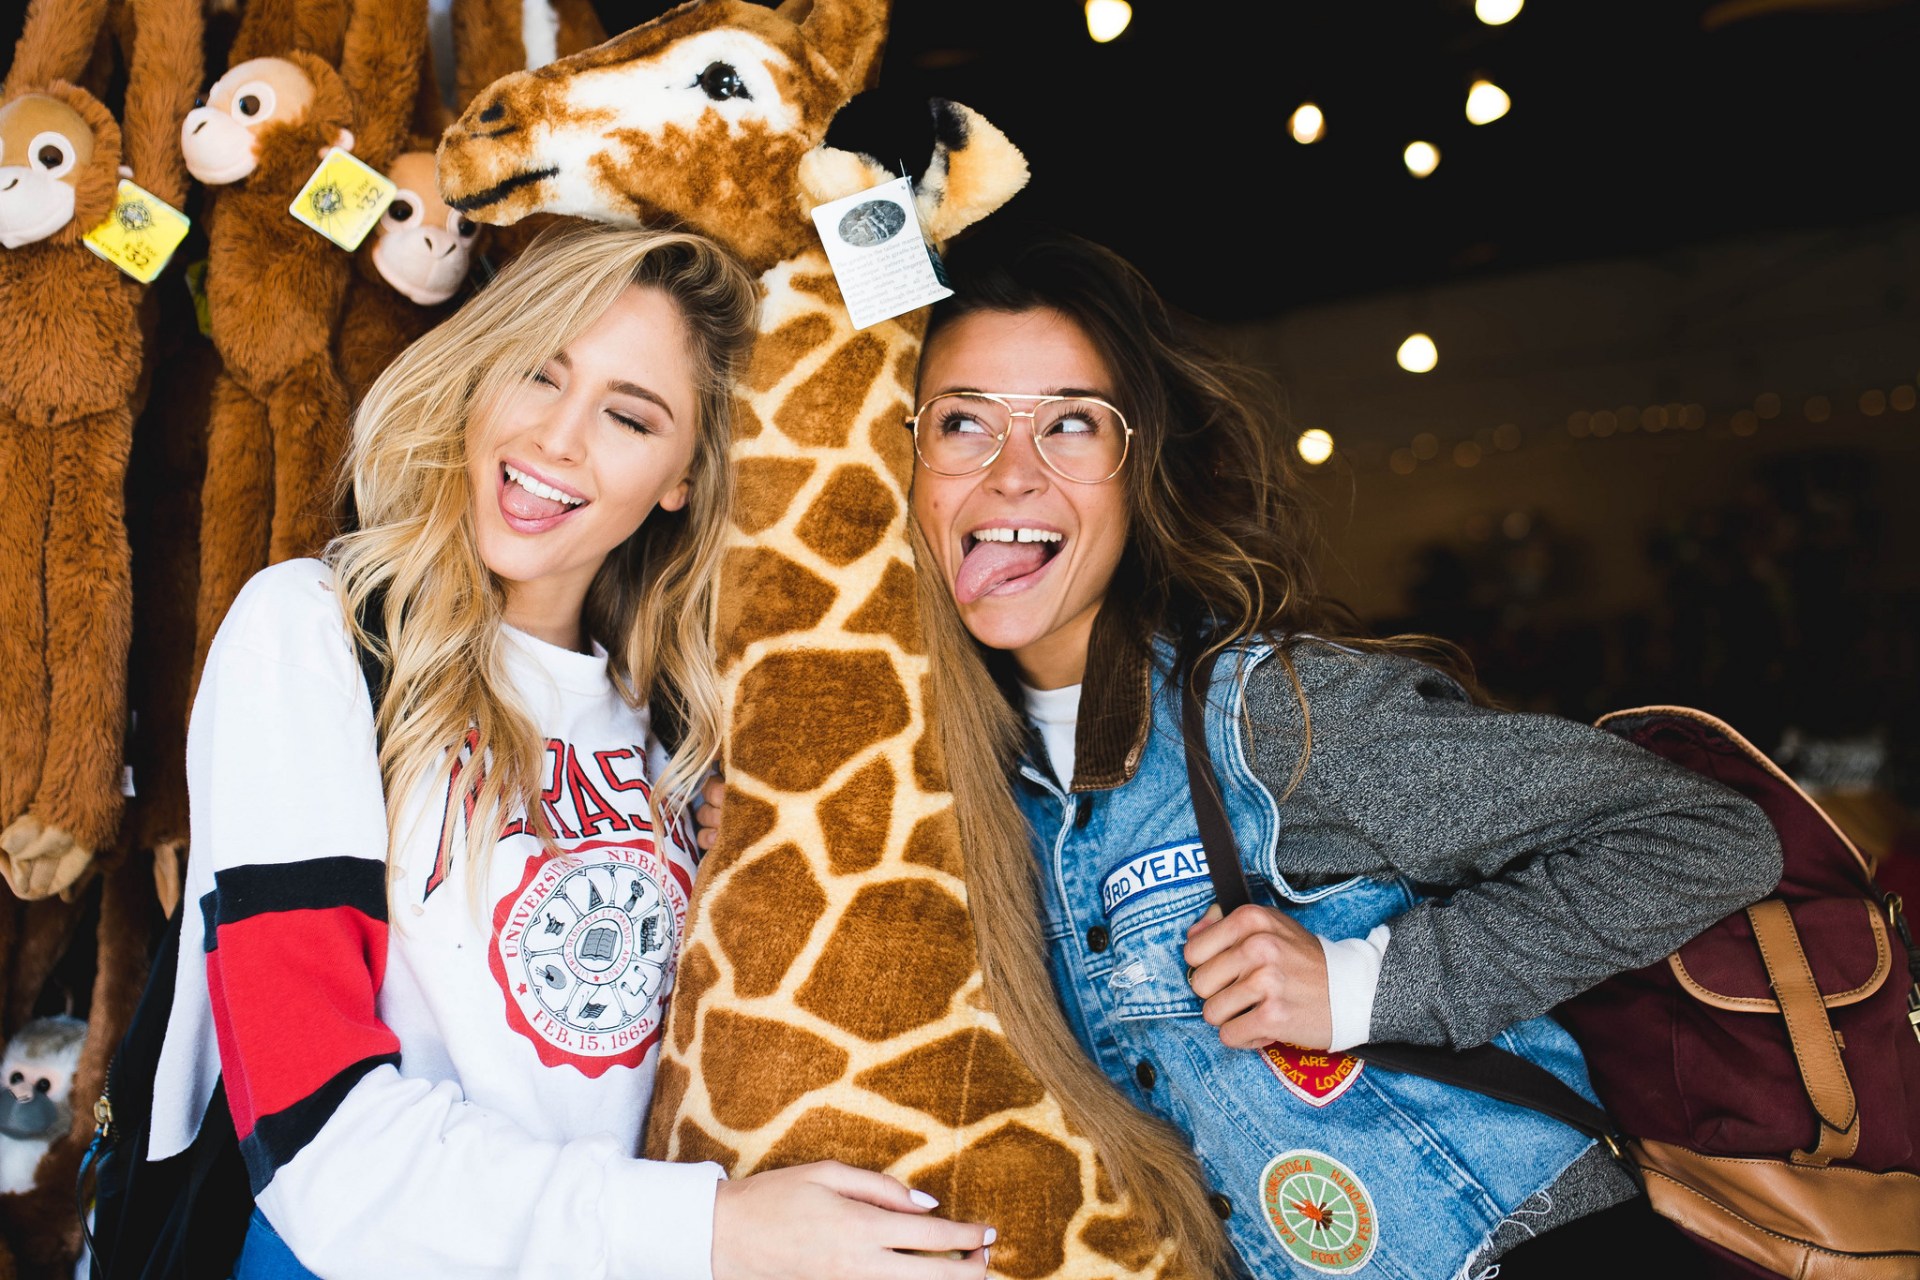 This Is How You Bring Out The Best In People, Based On Your Zodiac Sign